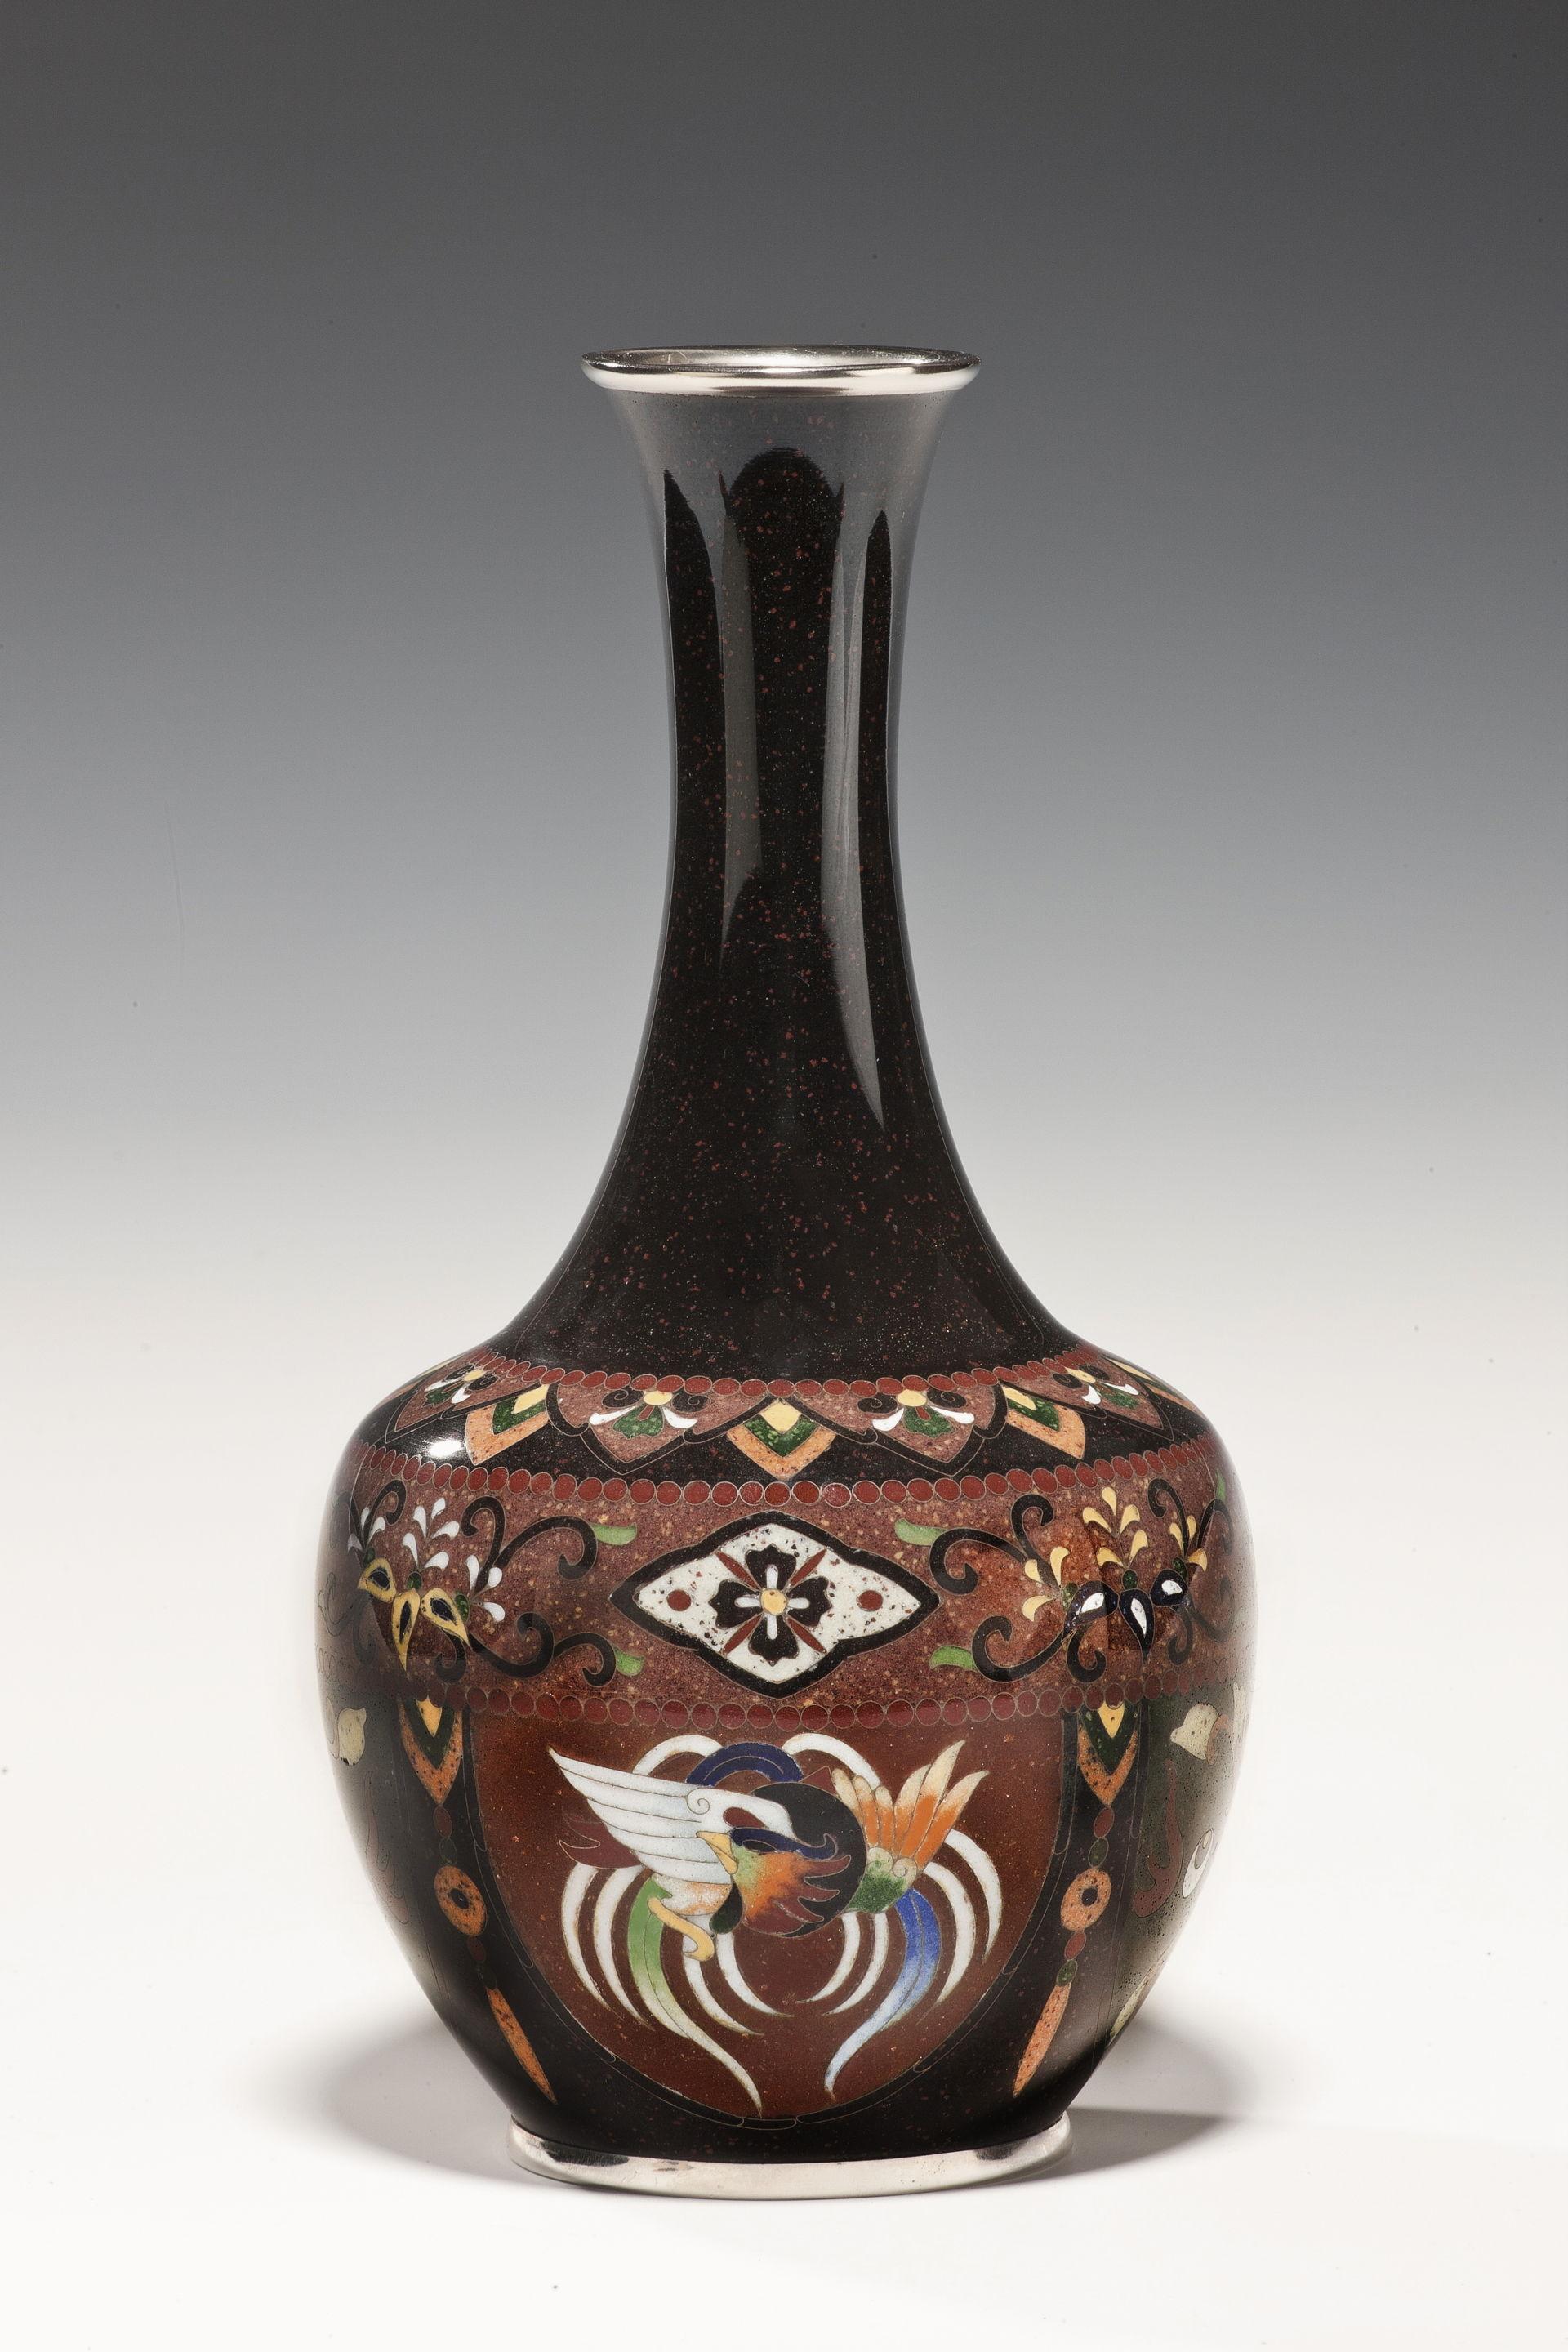 Black Japanese Cloisonné Vase In Good Condition For Sale In Lymington, Hampshire